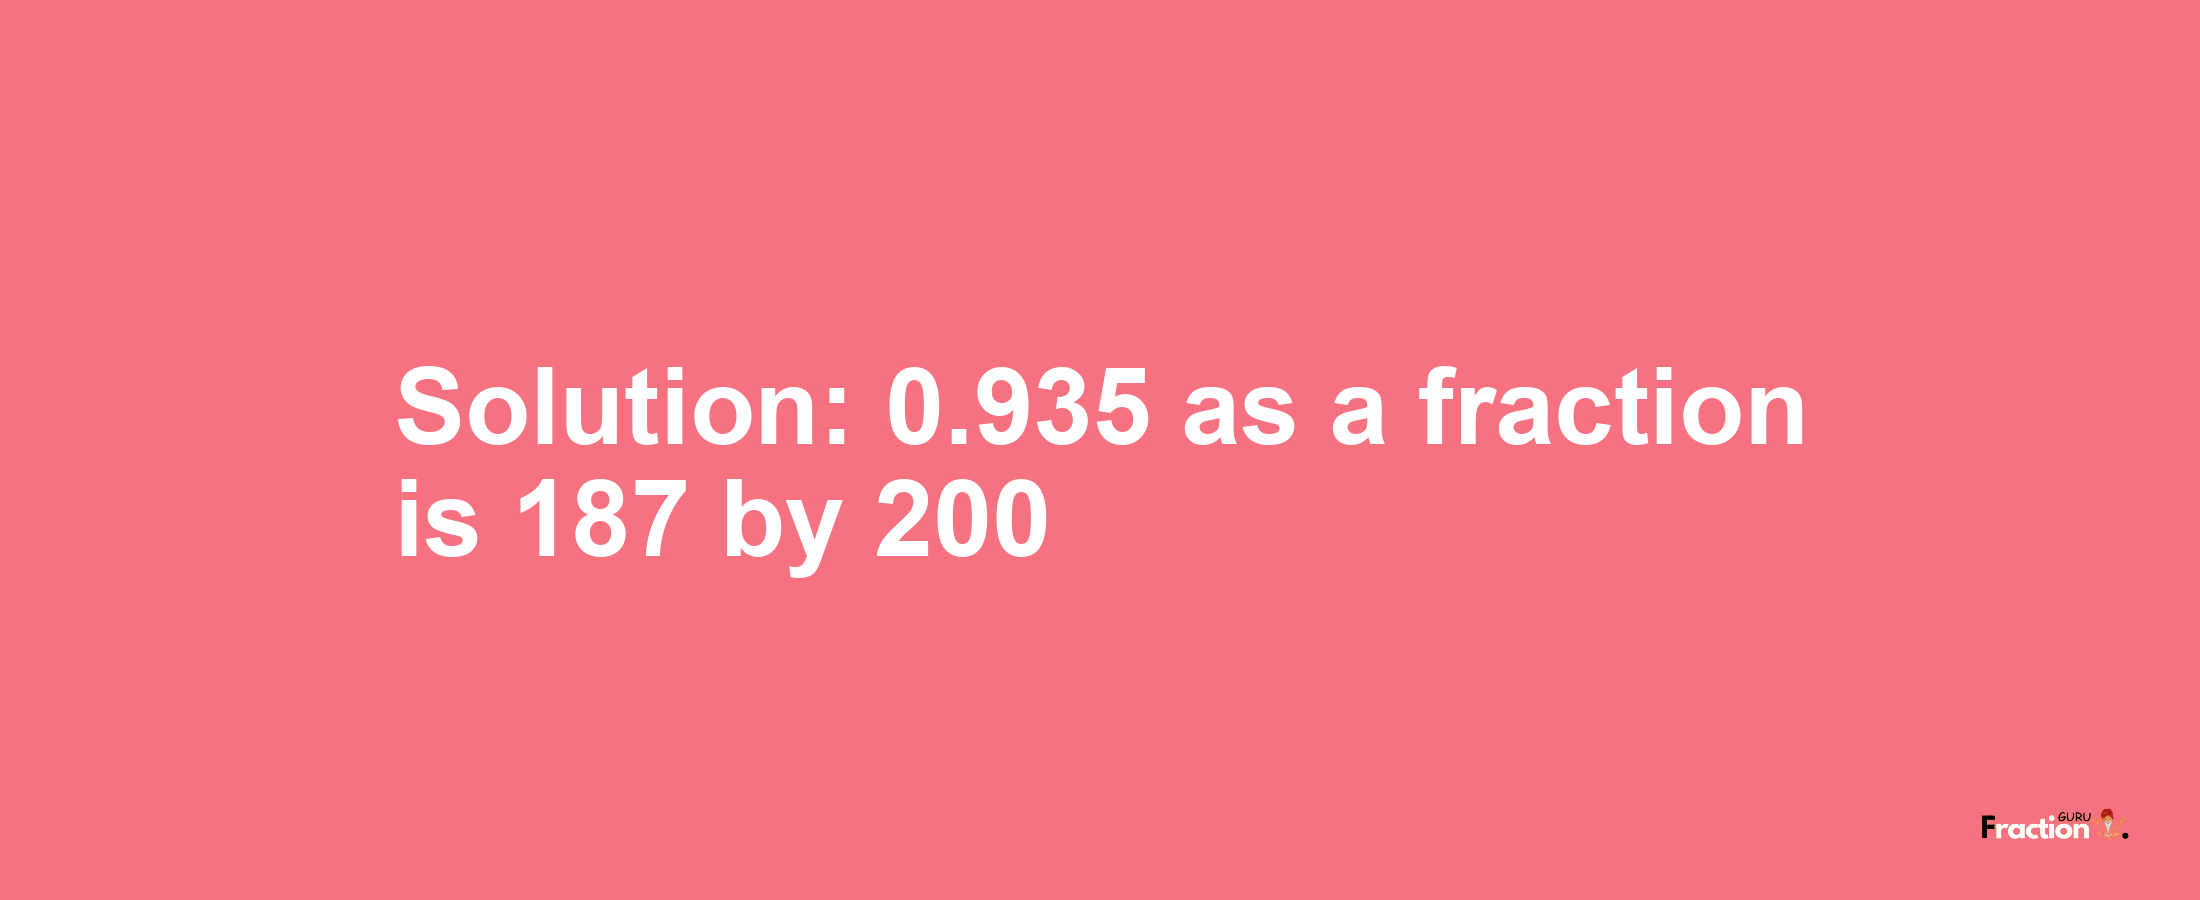 Solution:0.935 as a fraction is 187/200